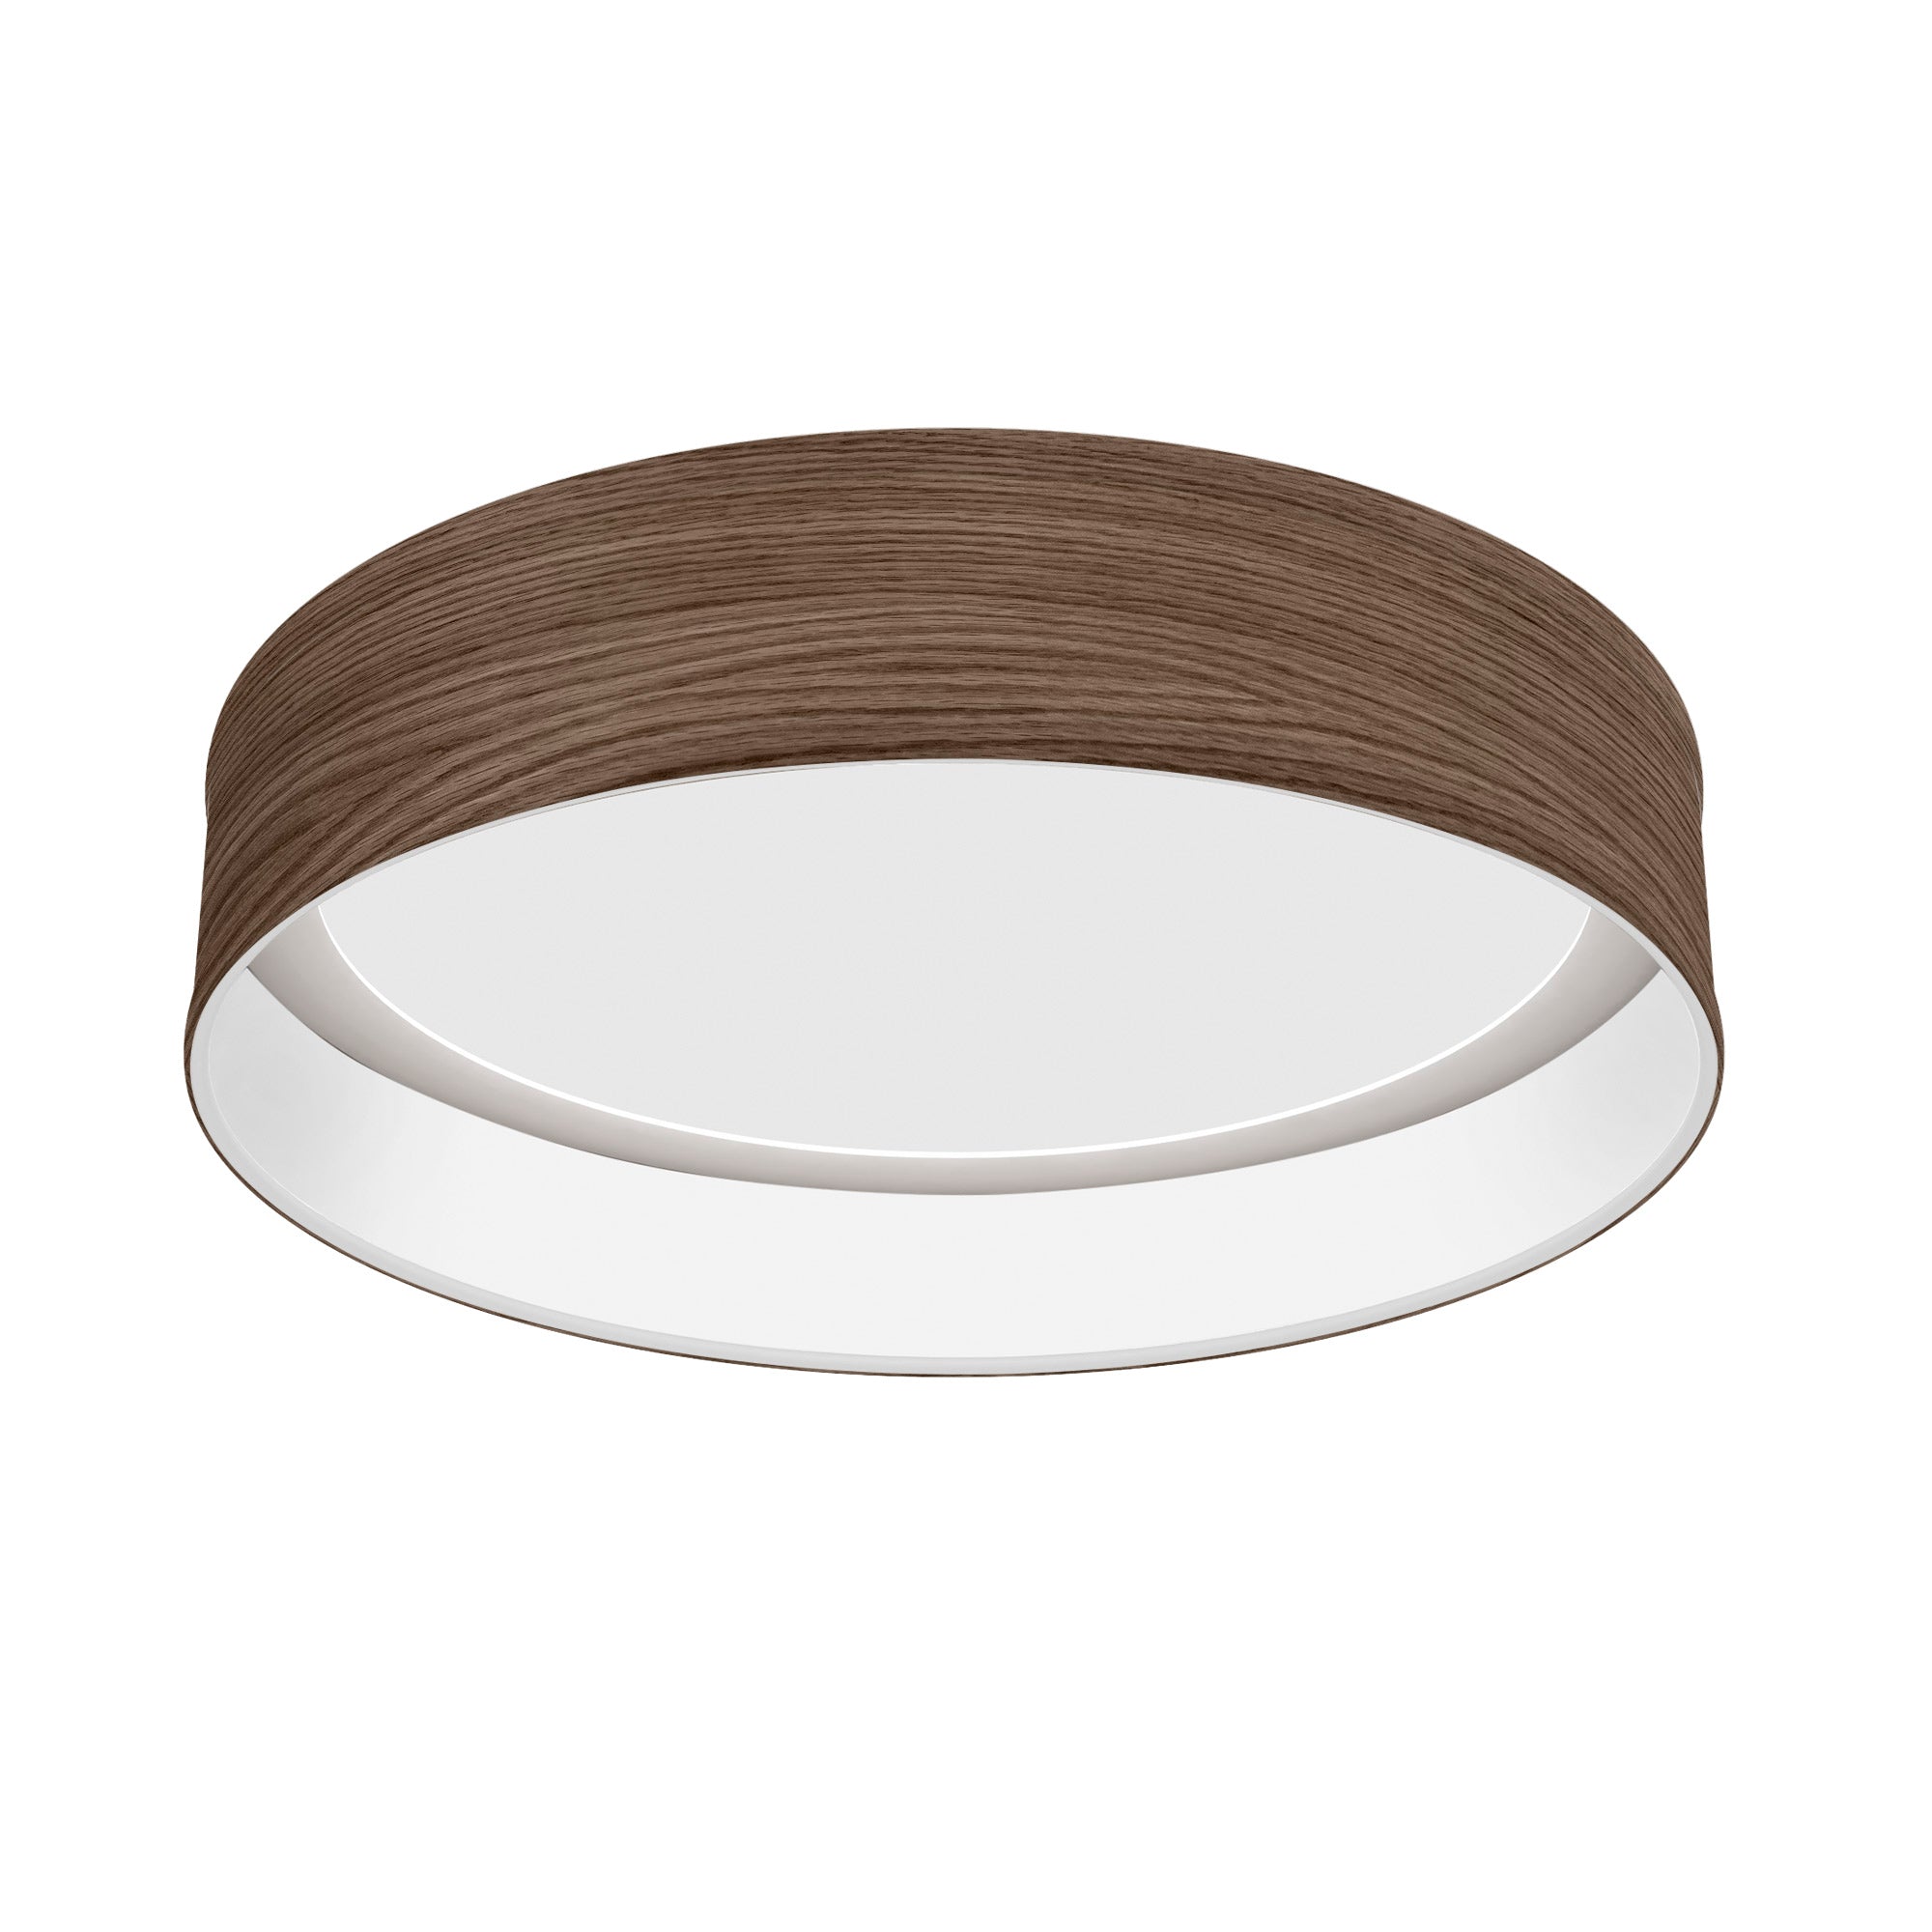 The Vince Flush Mount from Seascape Fixtures with a photo veneer shade in walnut color.